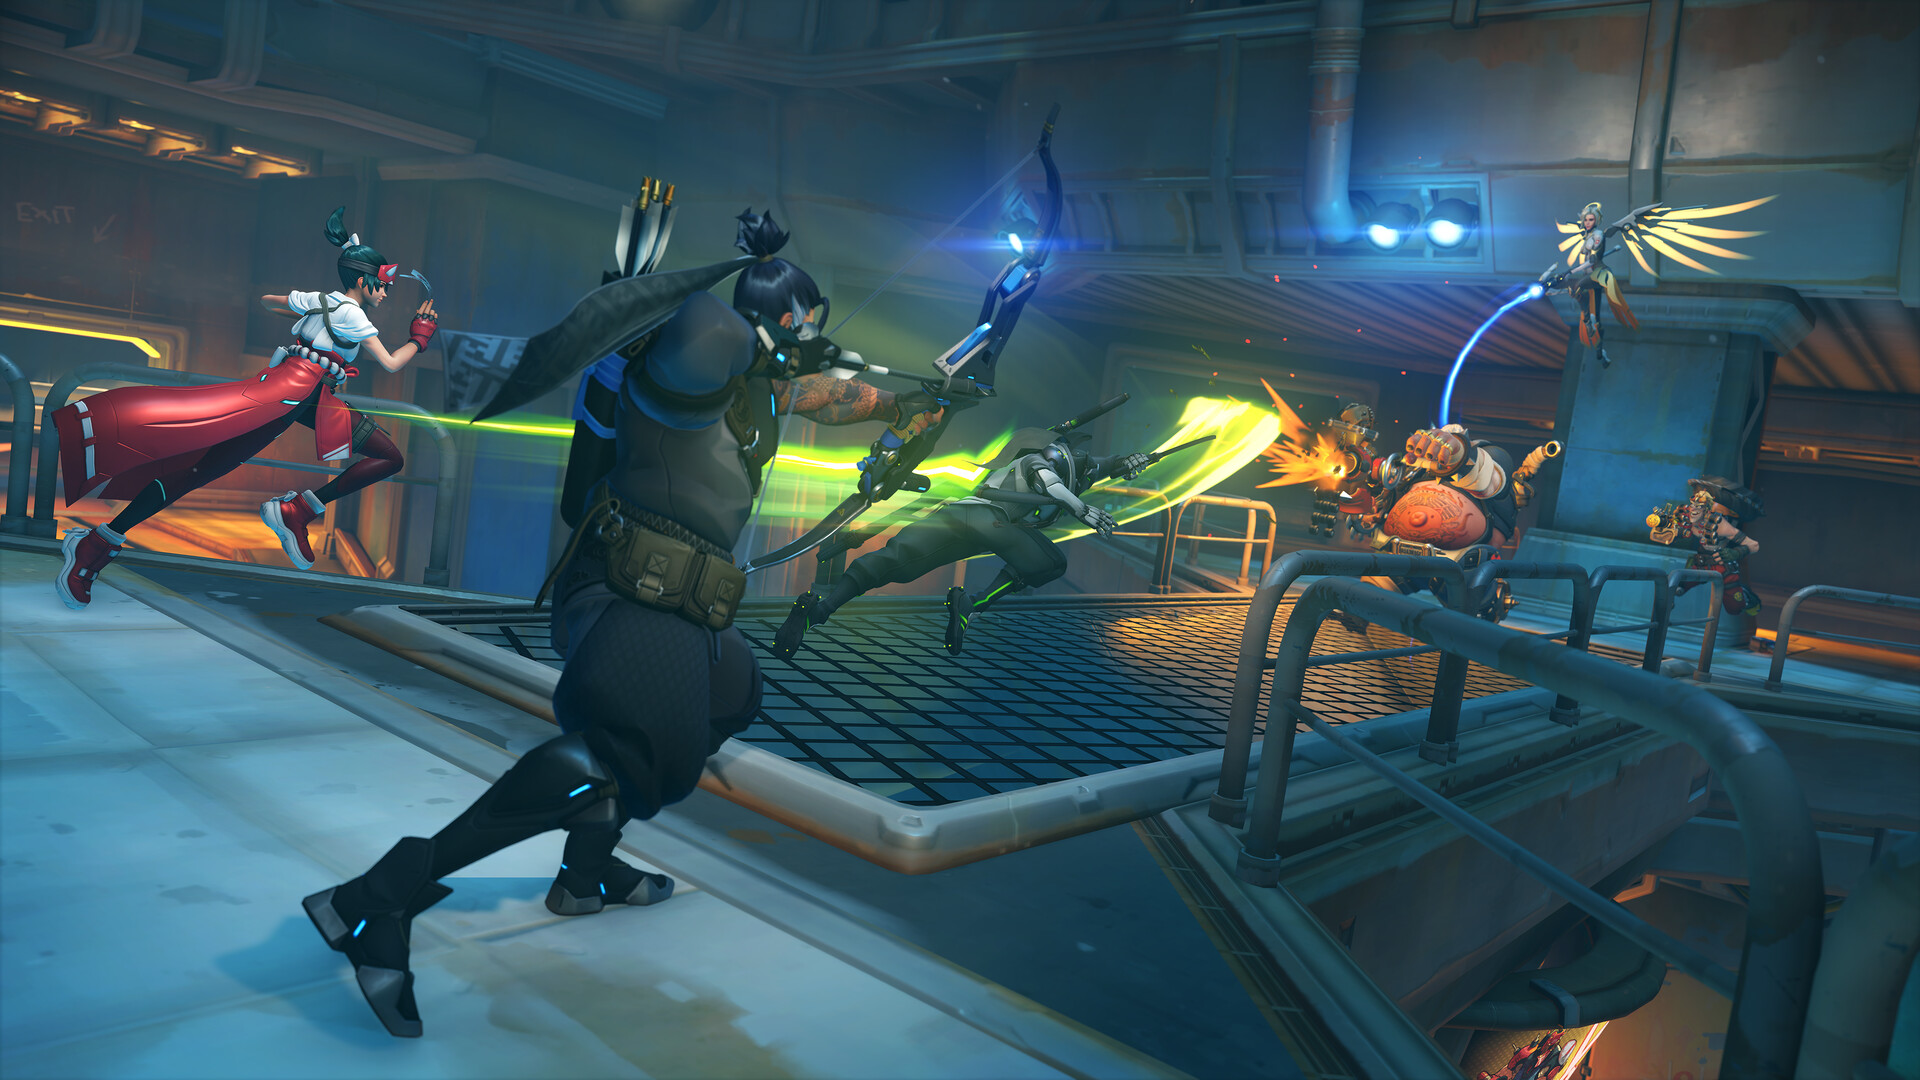 Here's how to play Overwatch 2 on Steam Deck / Linux